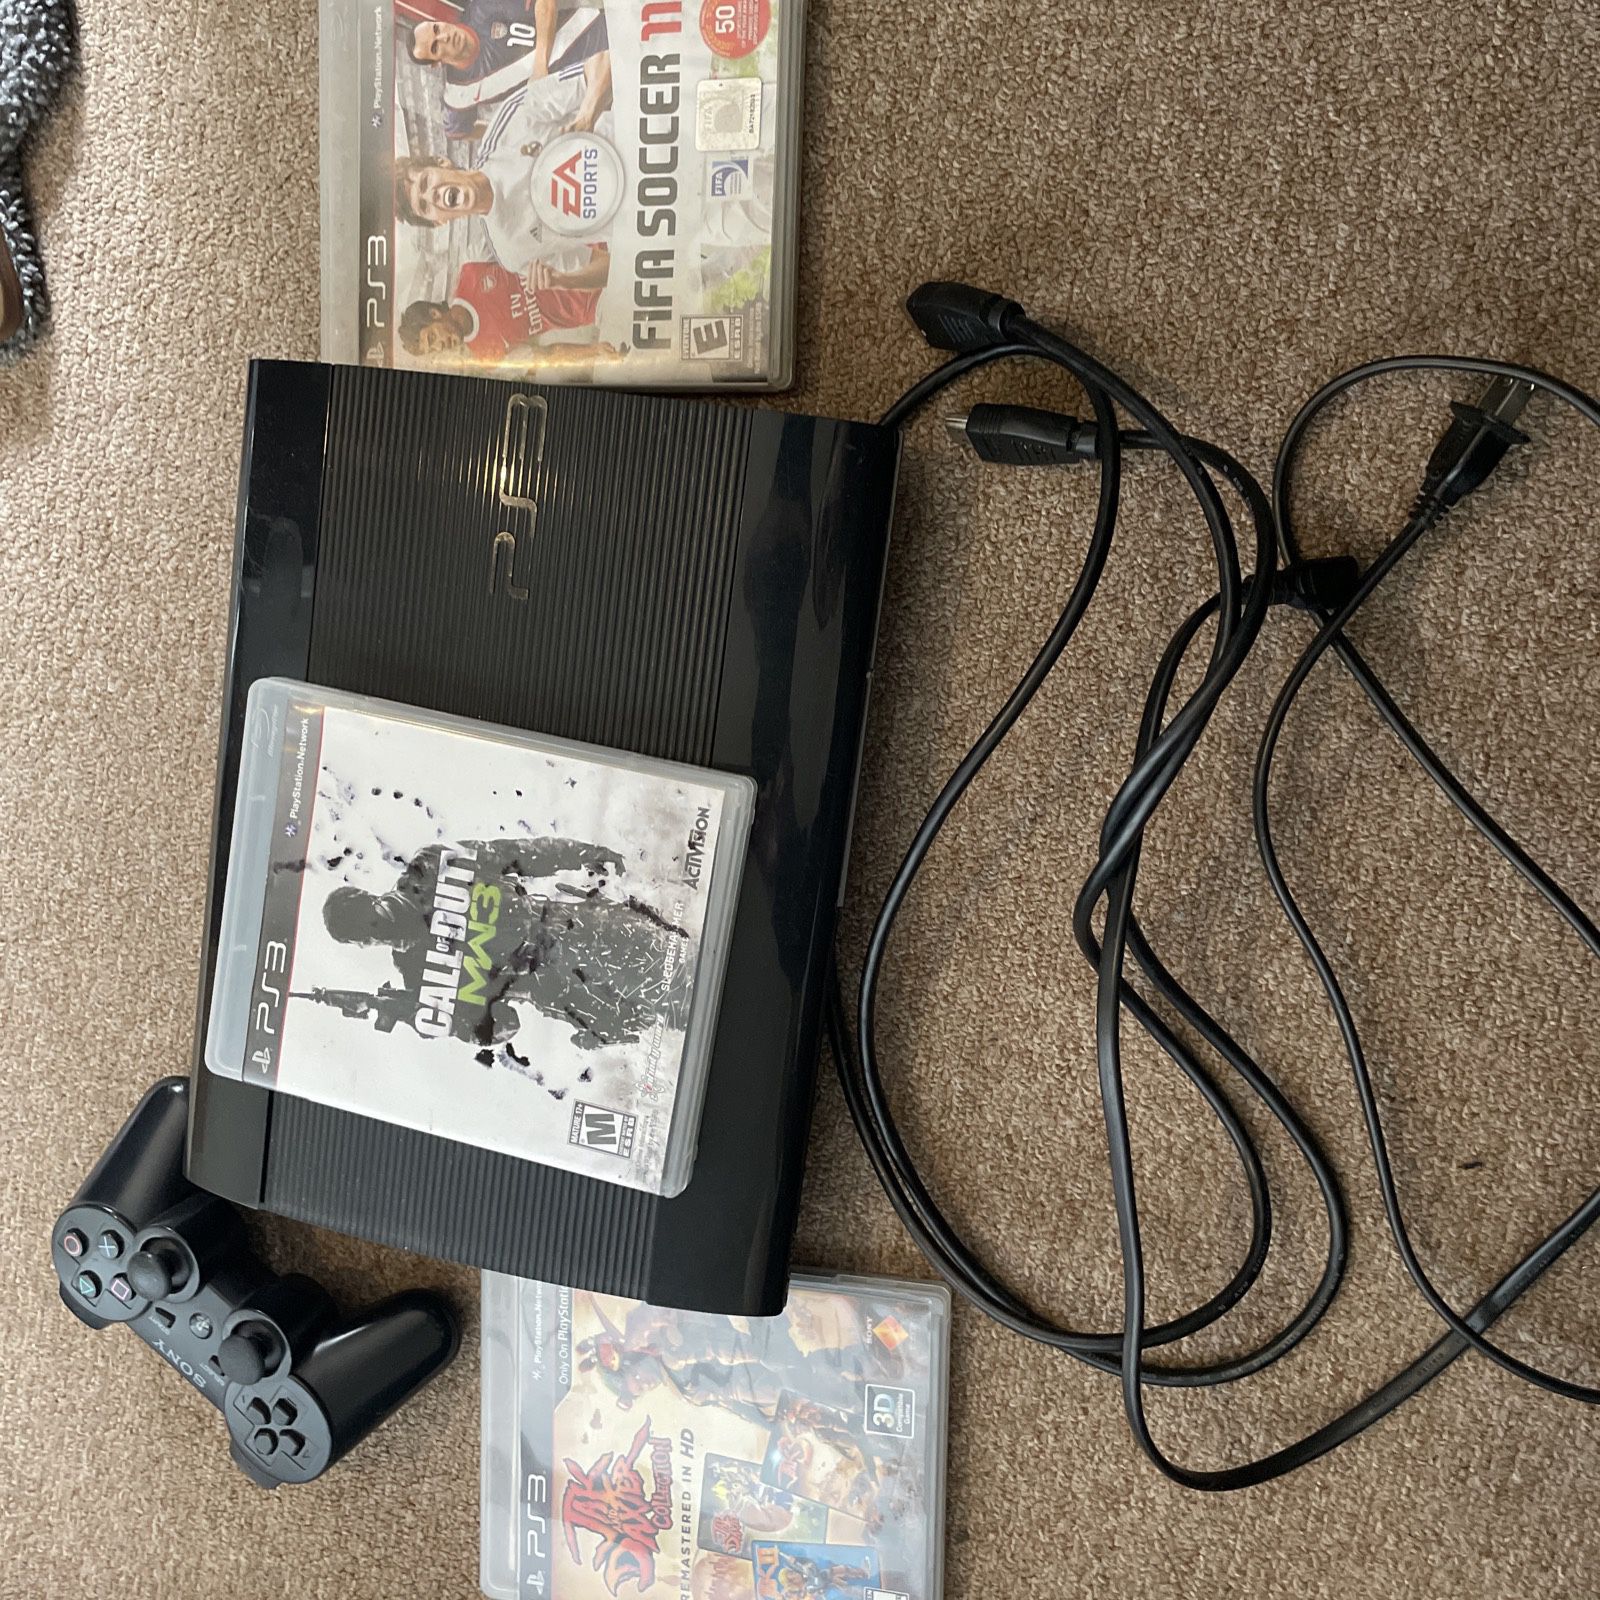 PS3 With 4 Games And A Controller 